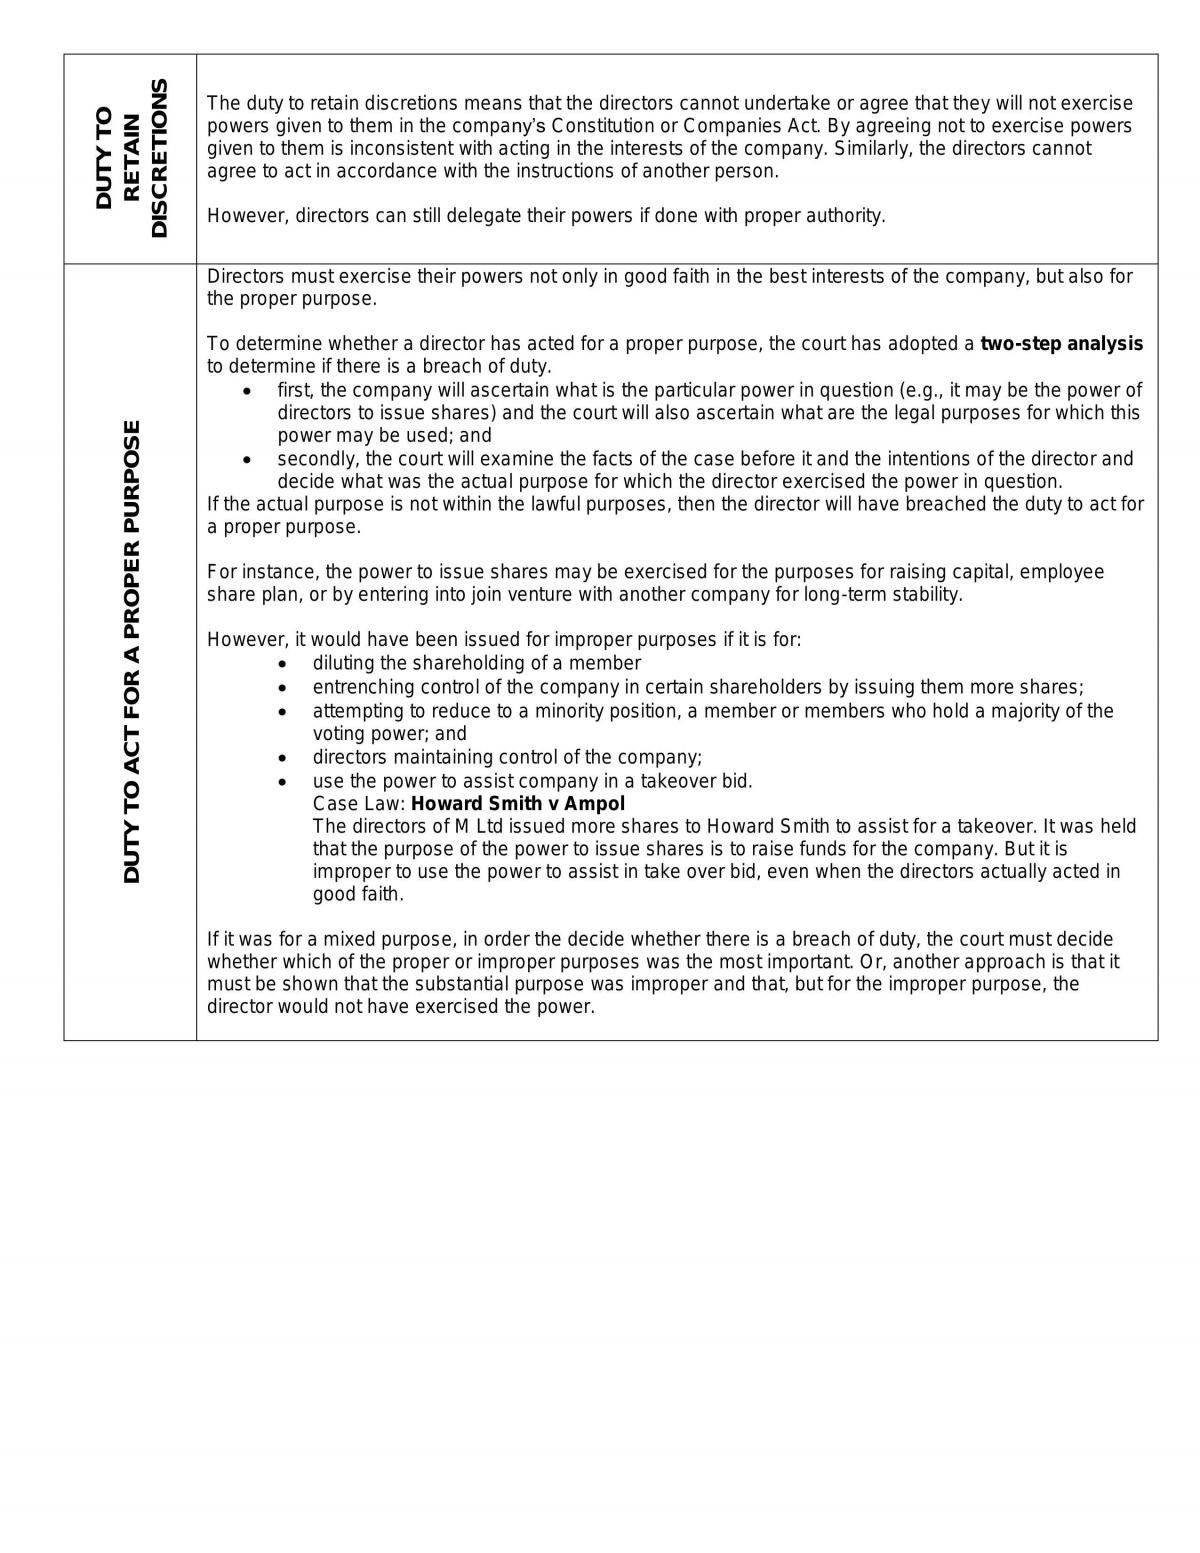 AC2302 Company Law and Corporate Governance Notes - Page 58